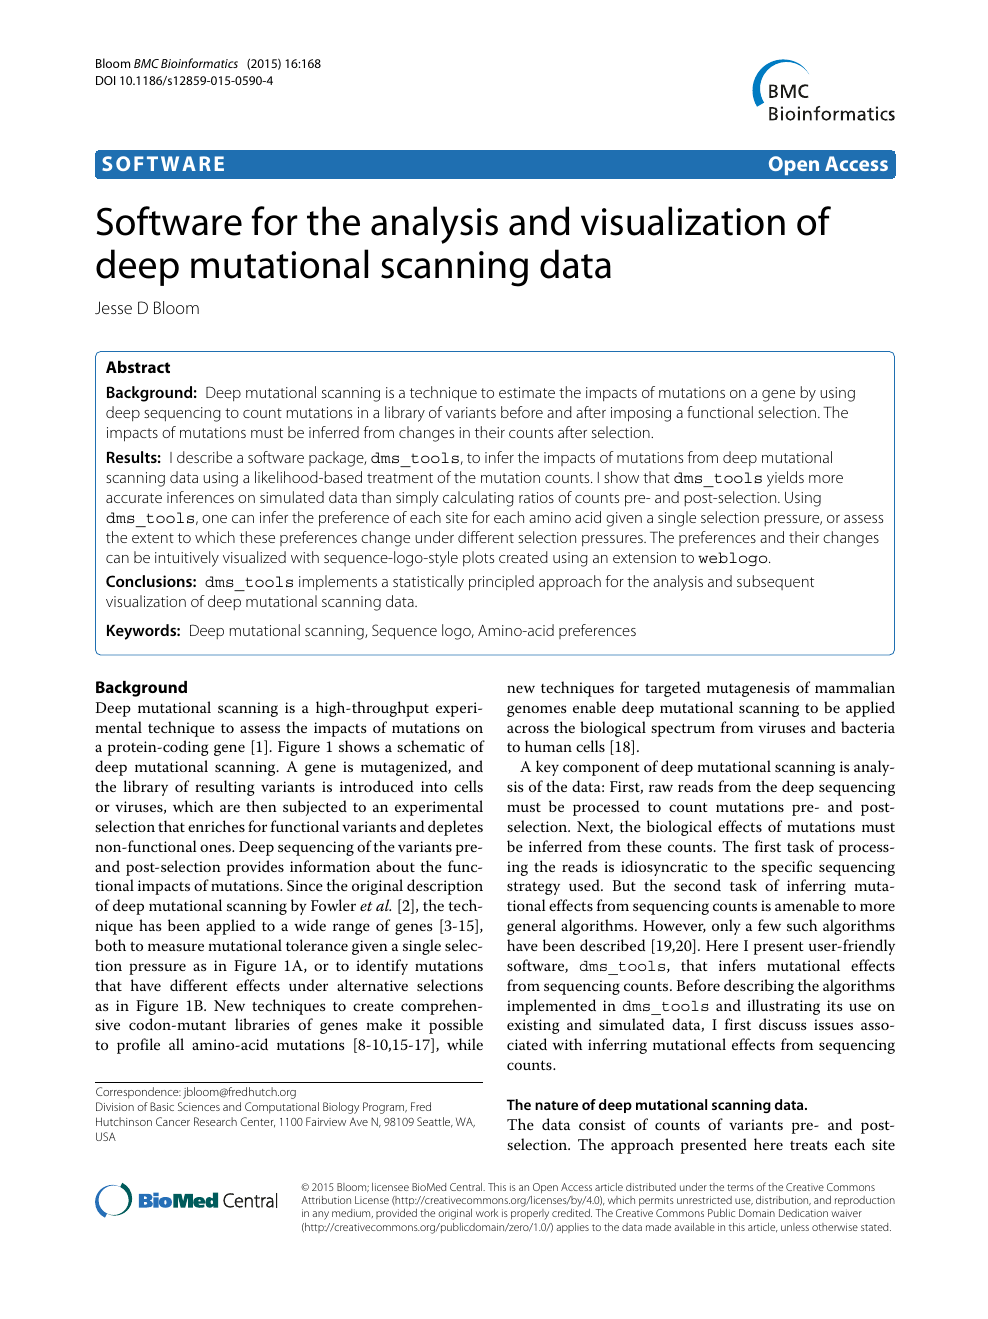 Software For The Analysis And Visualization Of Deep Mutational Scanning Data Topic Of Research Paper In Biological Sciences Download Scholarly Article Pdf And Read For Free On Cyberleninka Open Science Hub